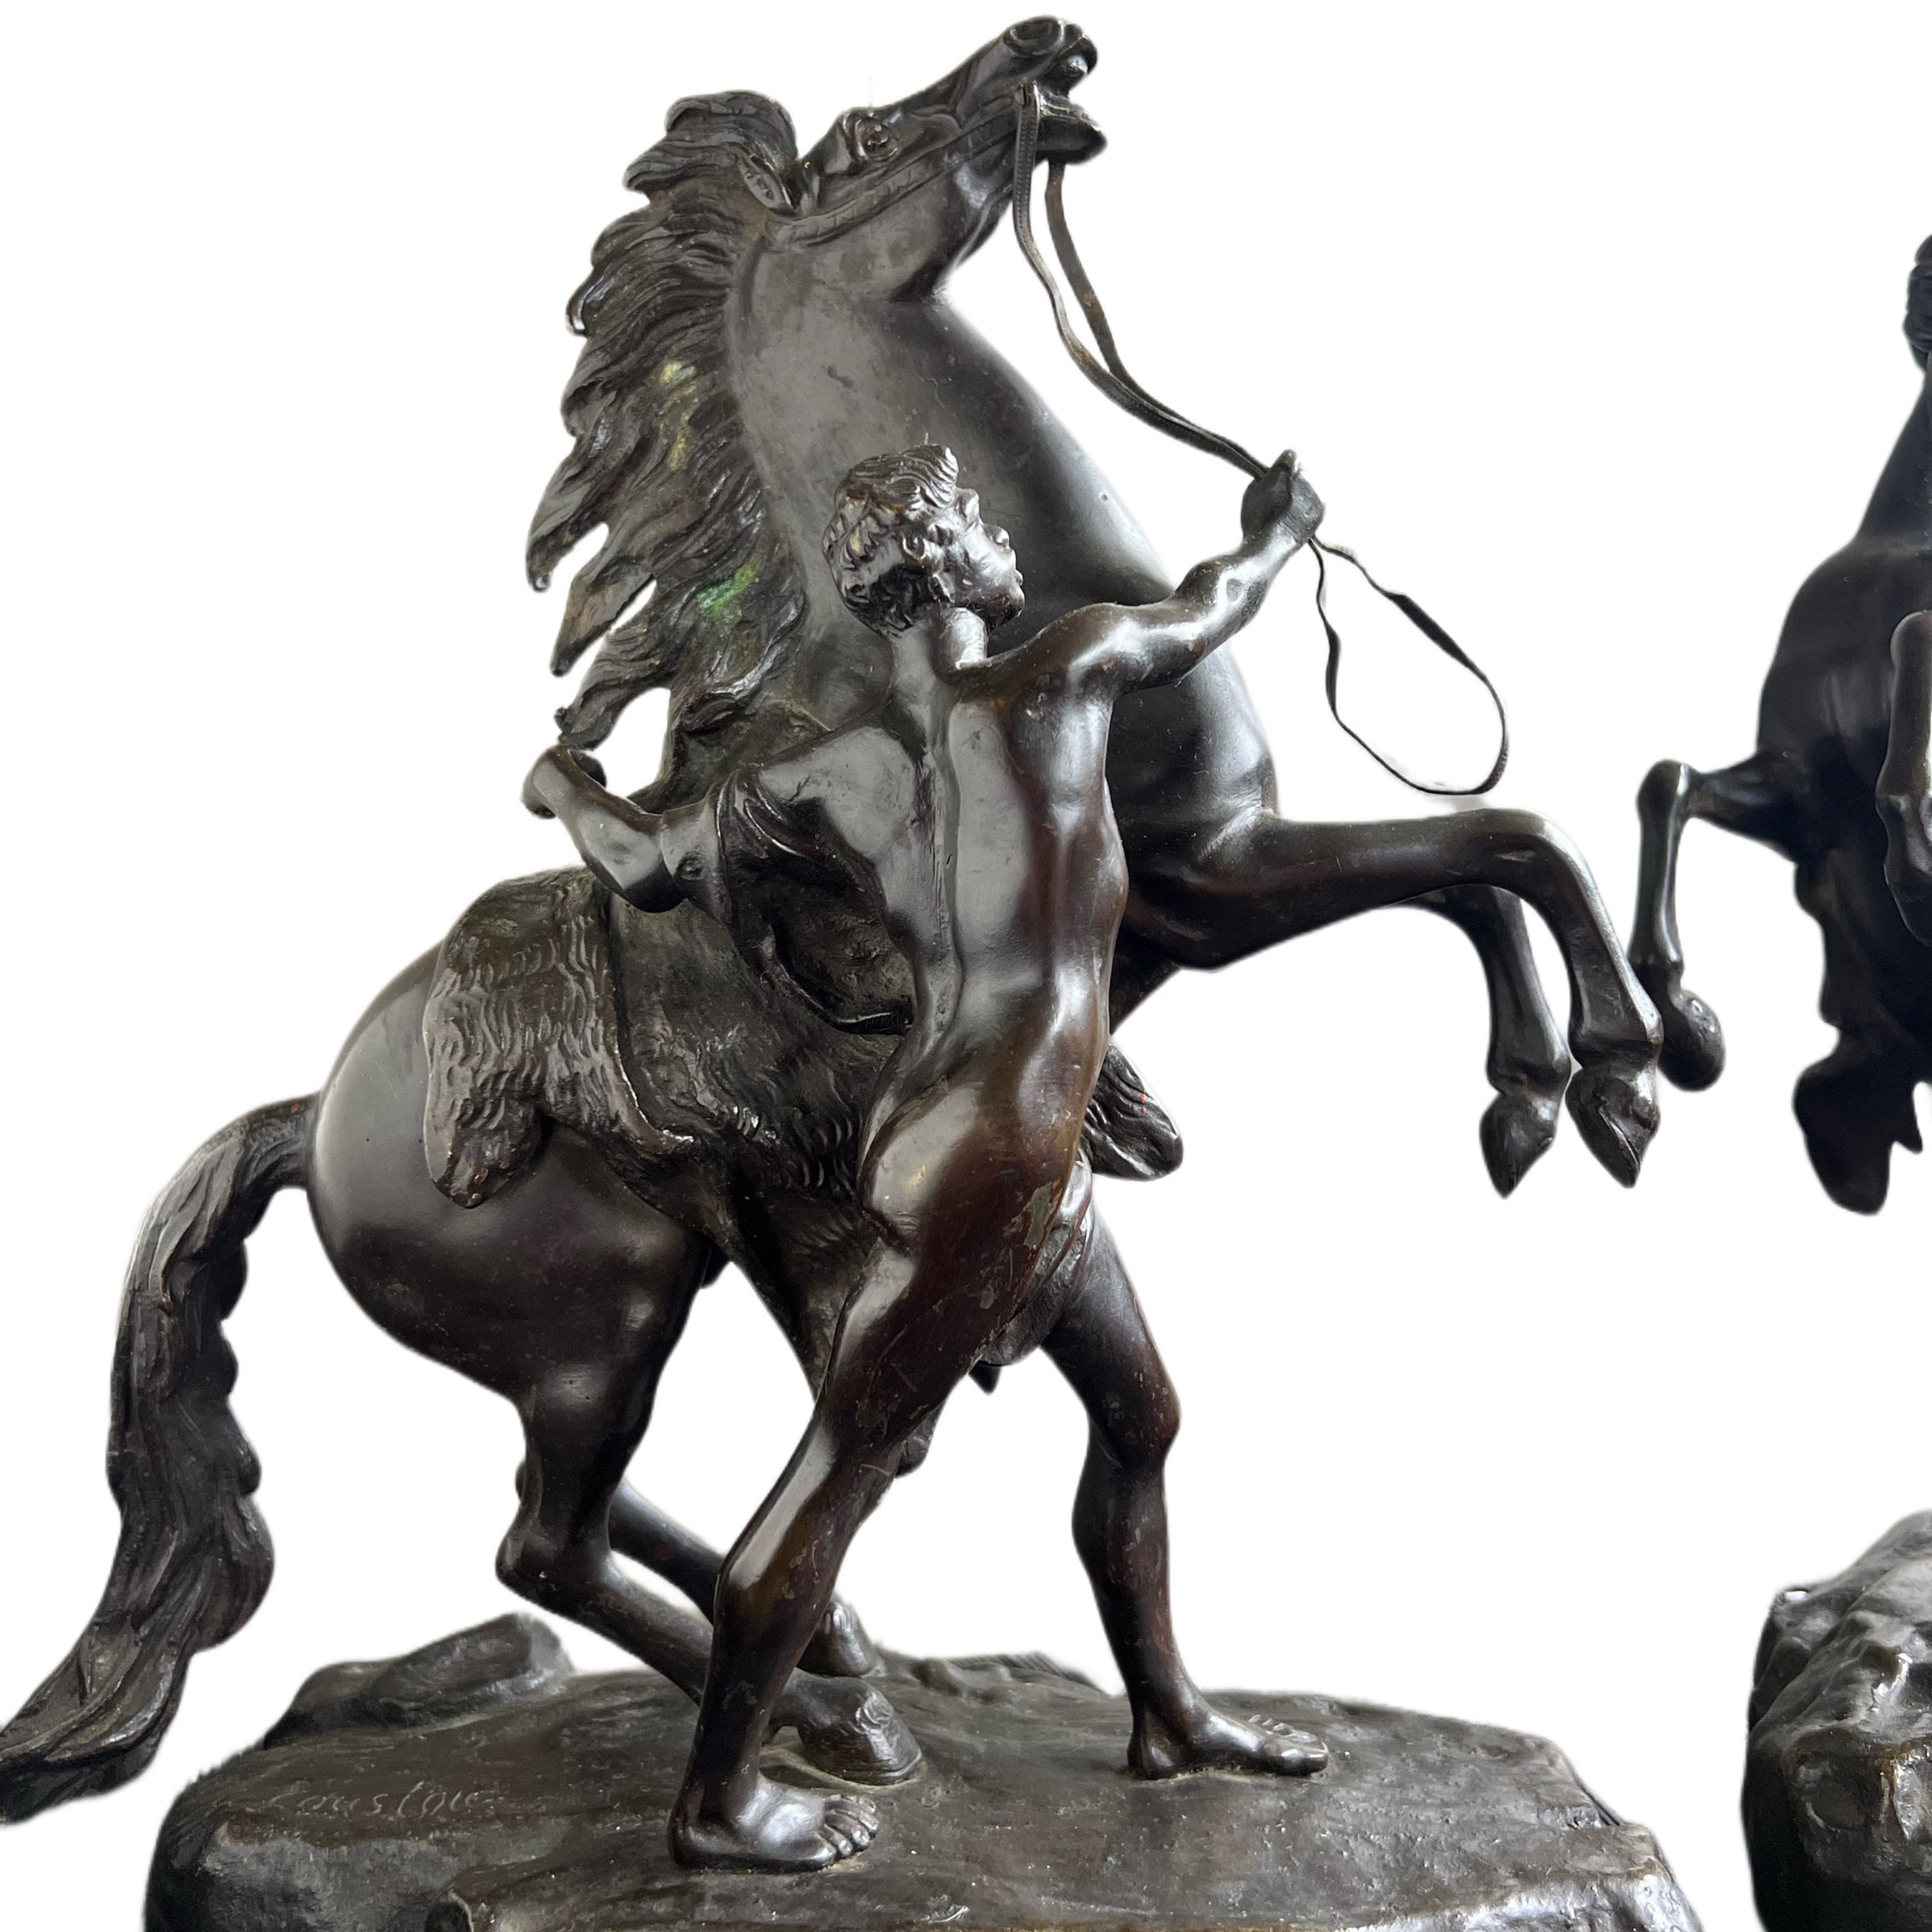 A fine pair of late 19th century bronze Marley Horses, after Guillame Cousteau (1677-1746)